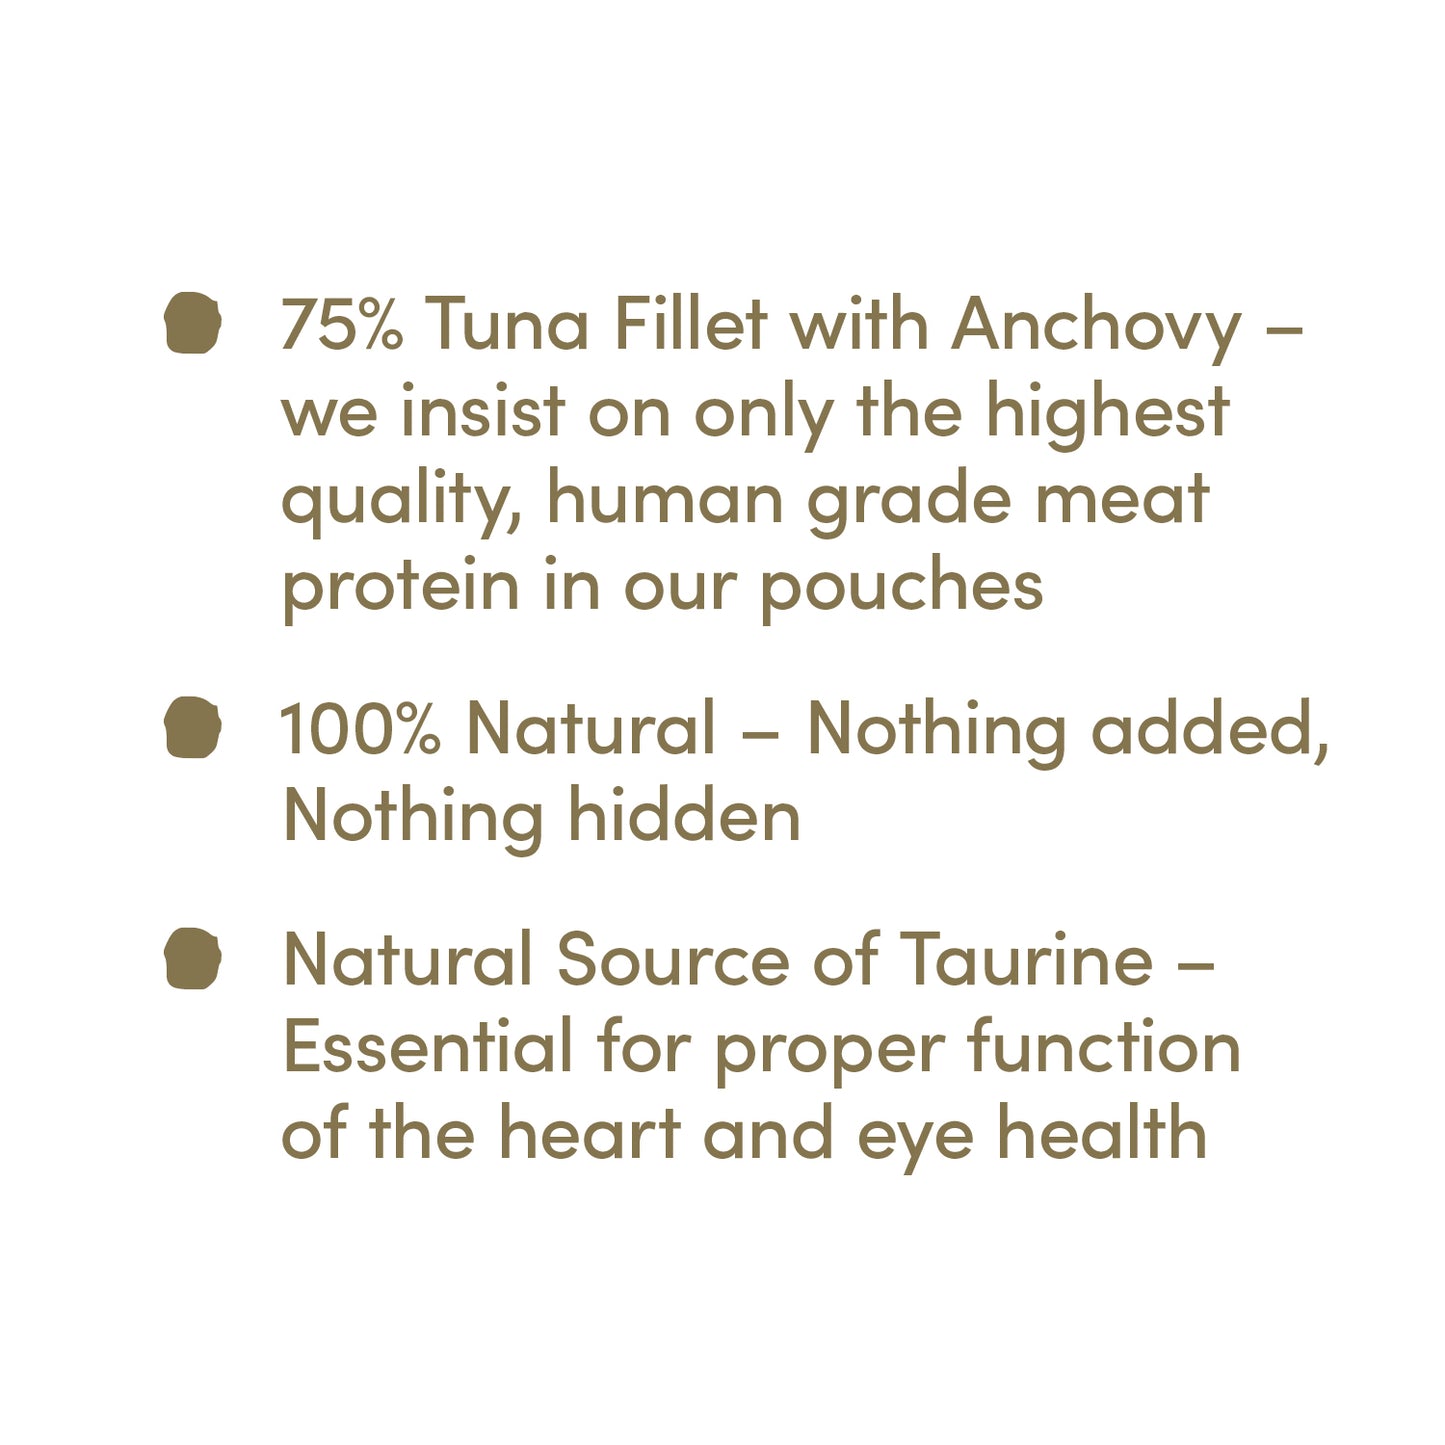 Applaws - Cat Pouch Tuna Fillet with Whole Anchovy